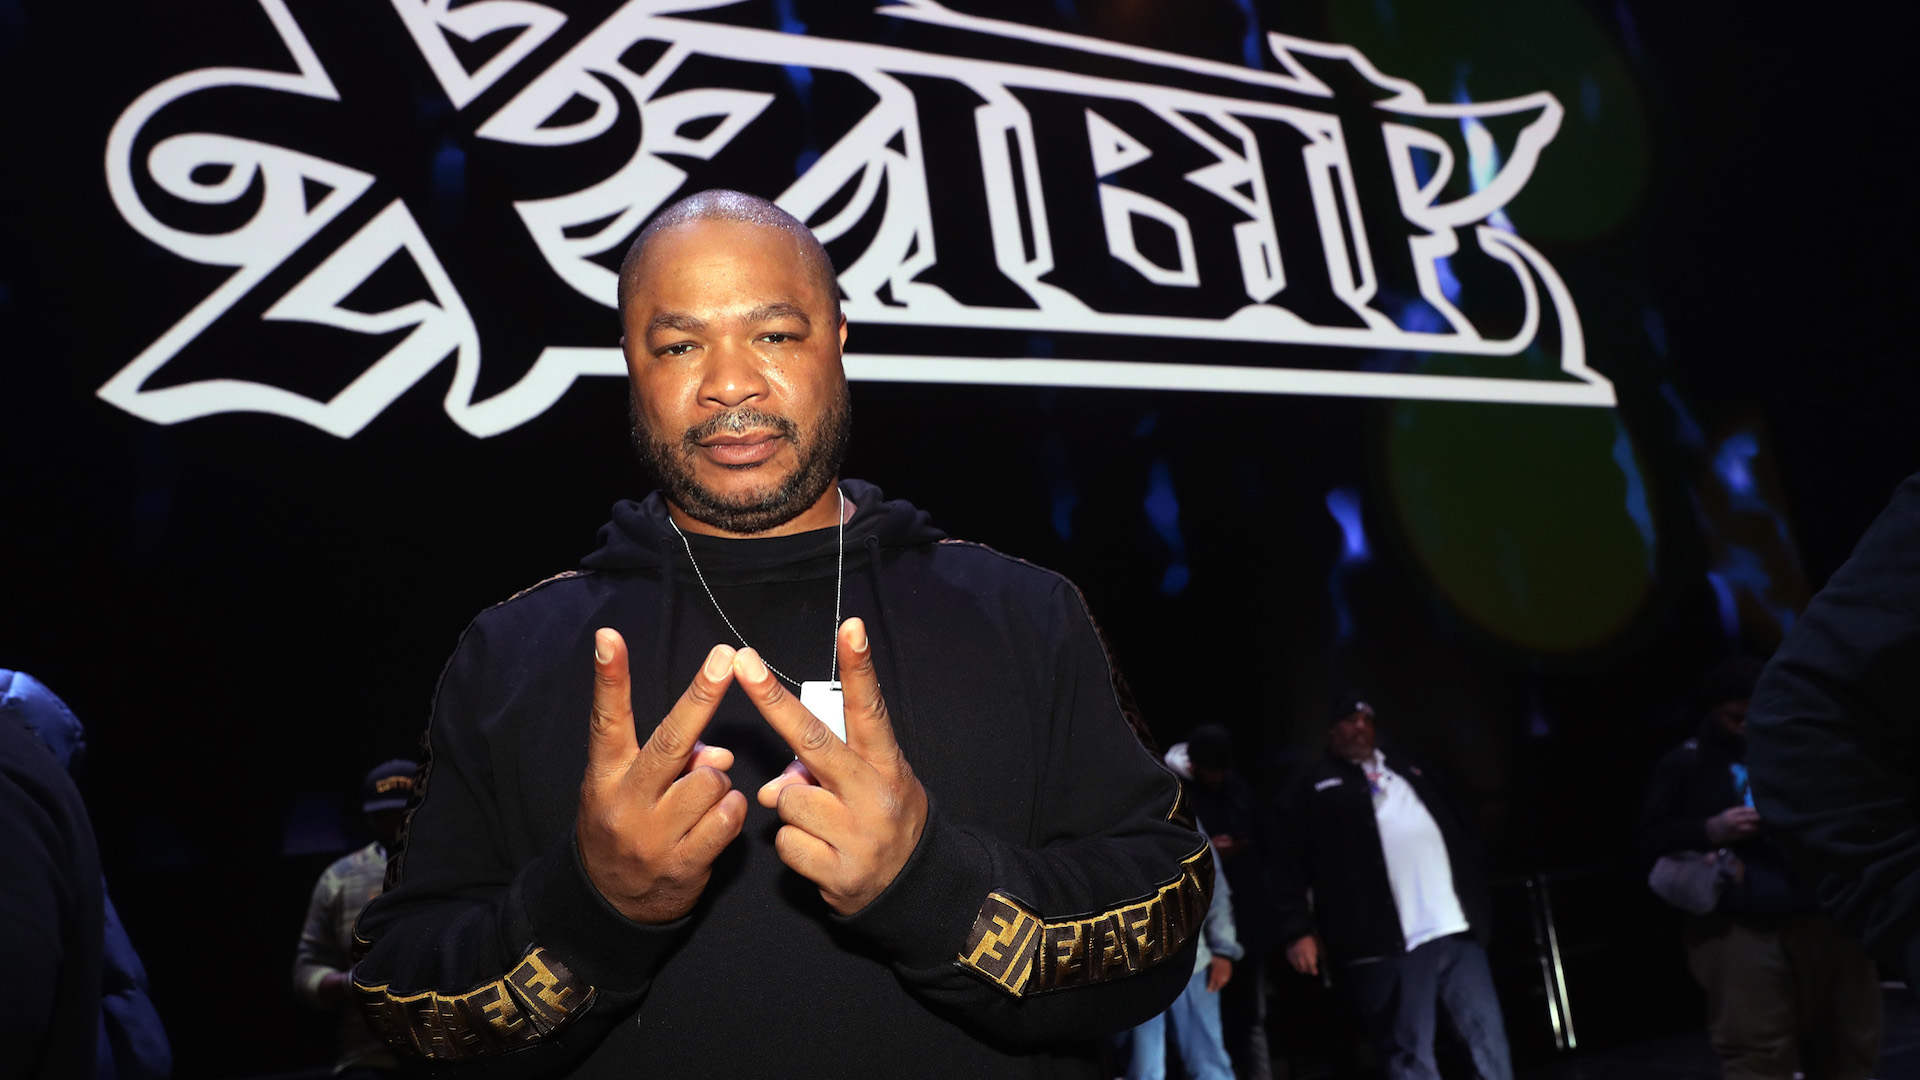 Xzibit’s Wife of 6 Years Files for Divorce After Two Decades Together